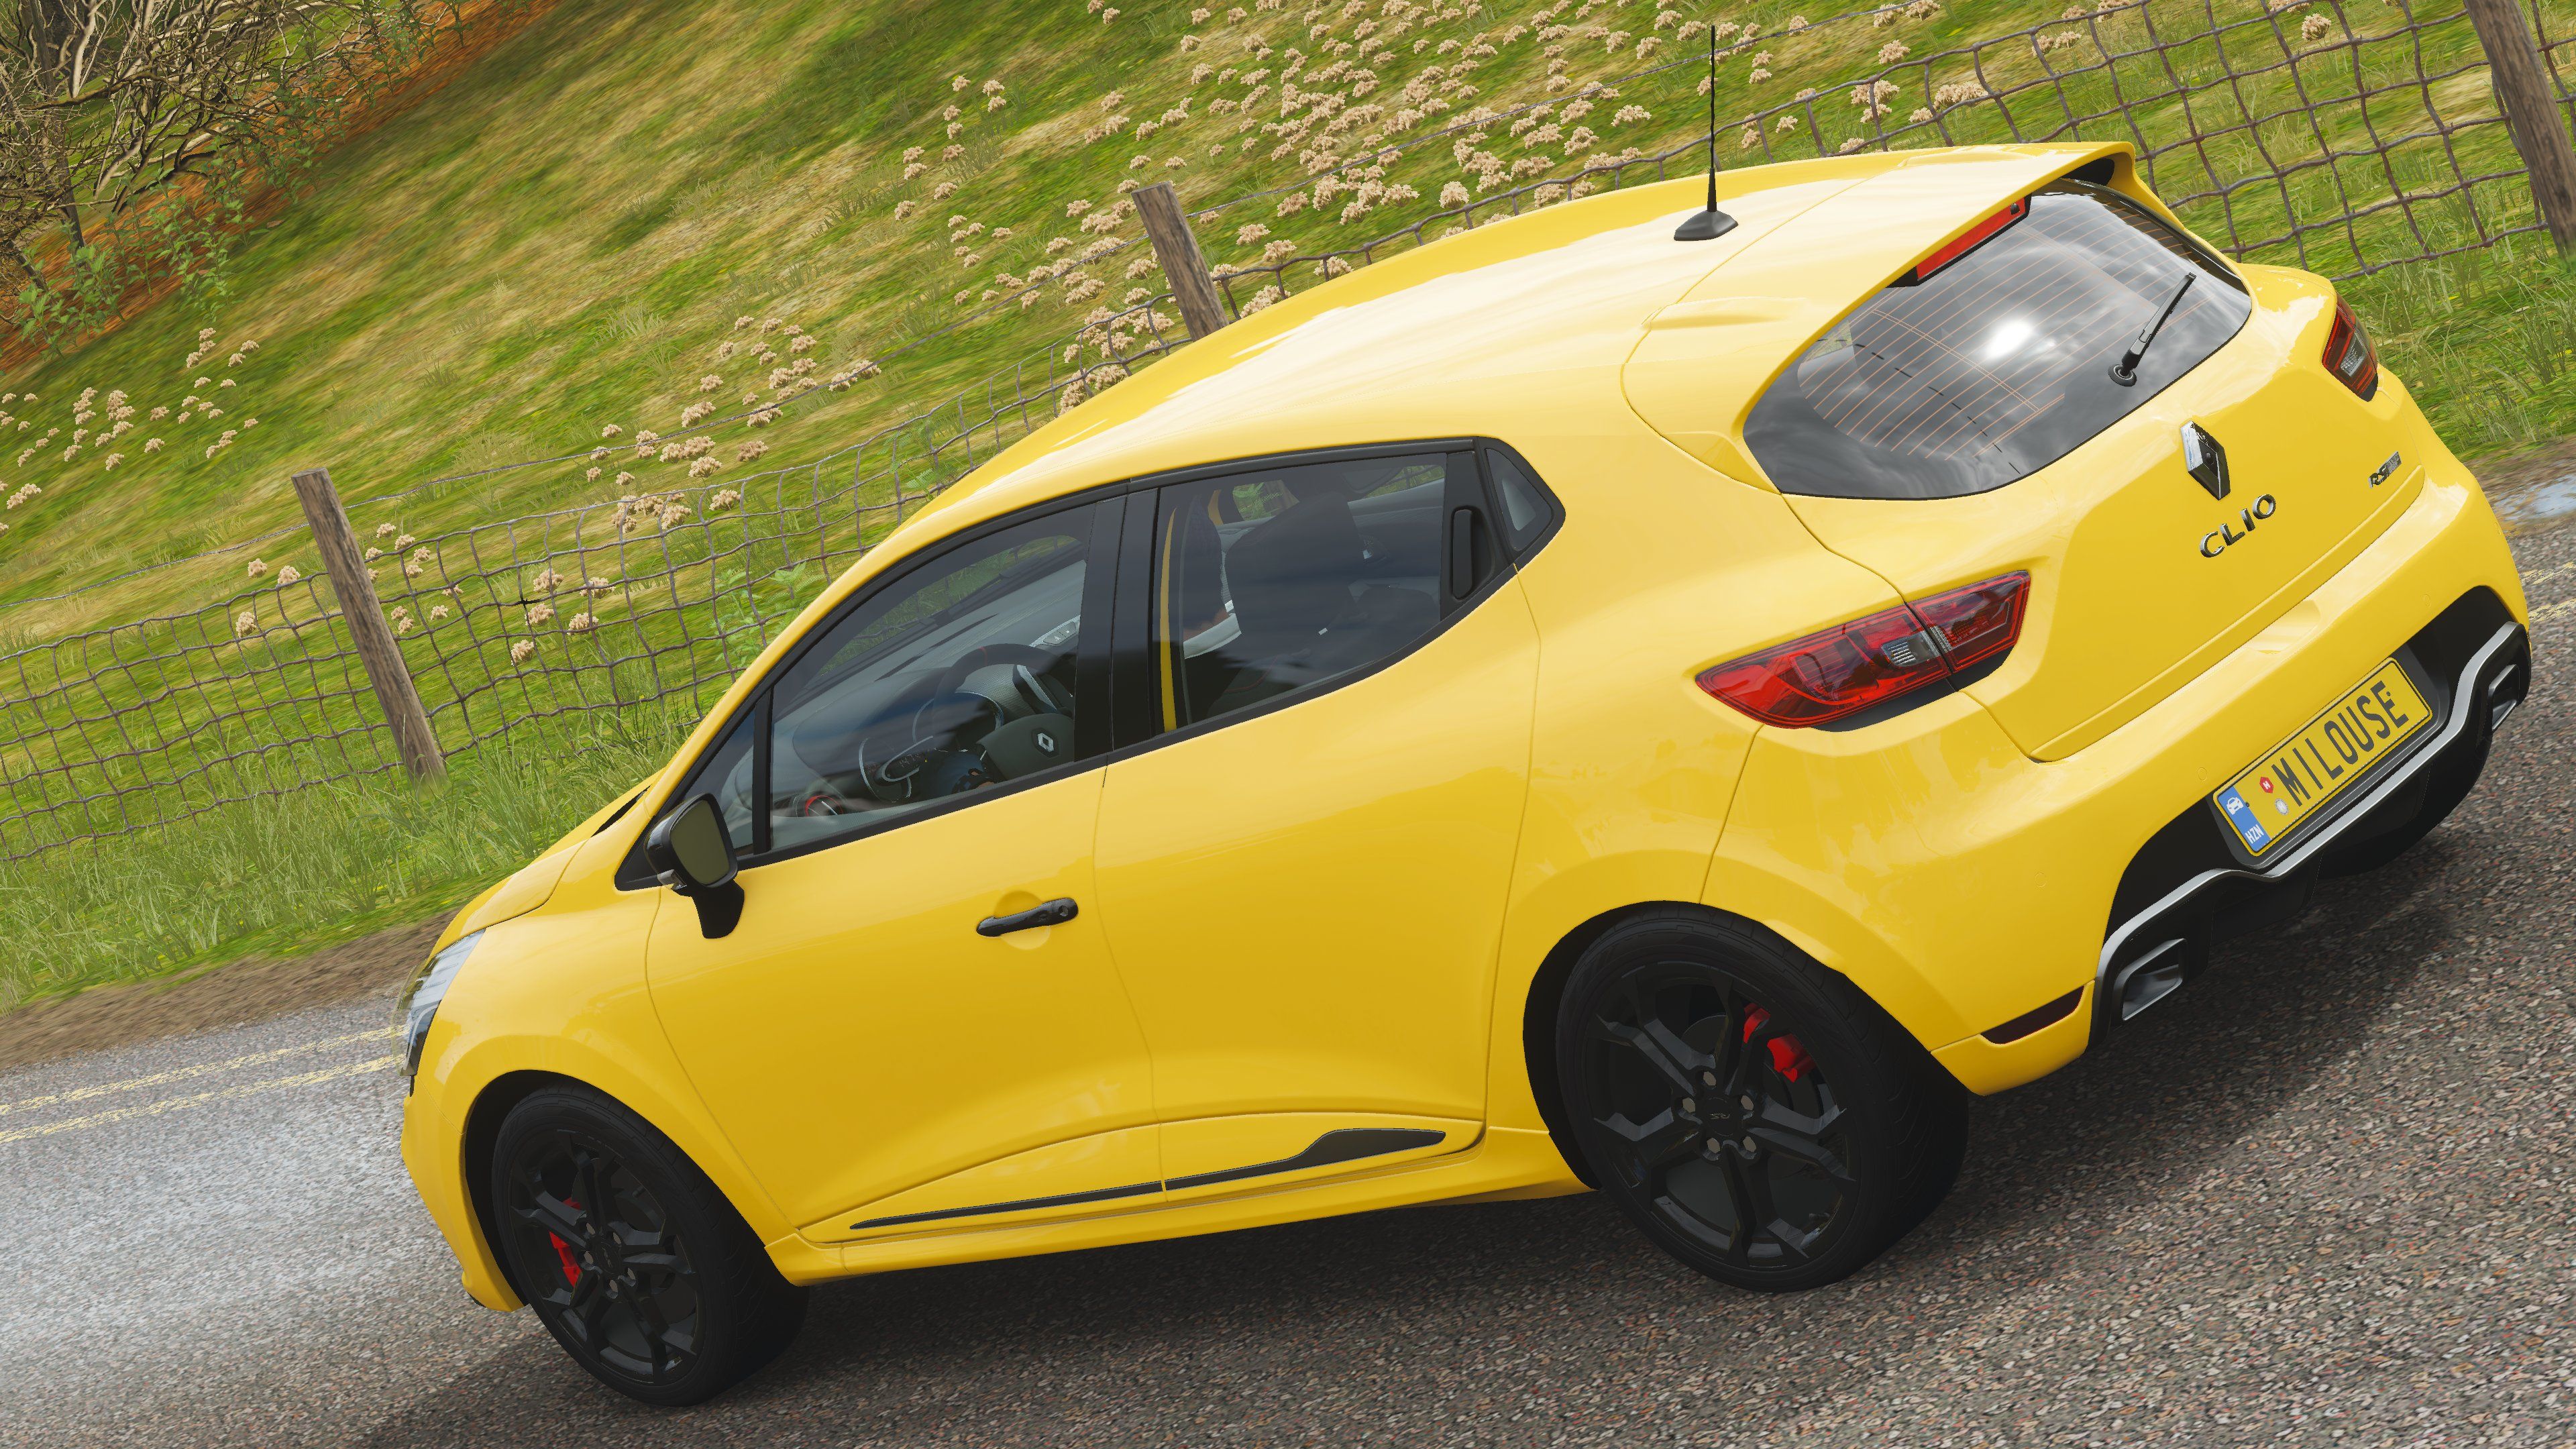 Renault Clio R.S. exterior restyling